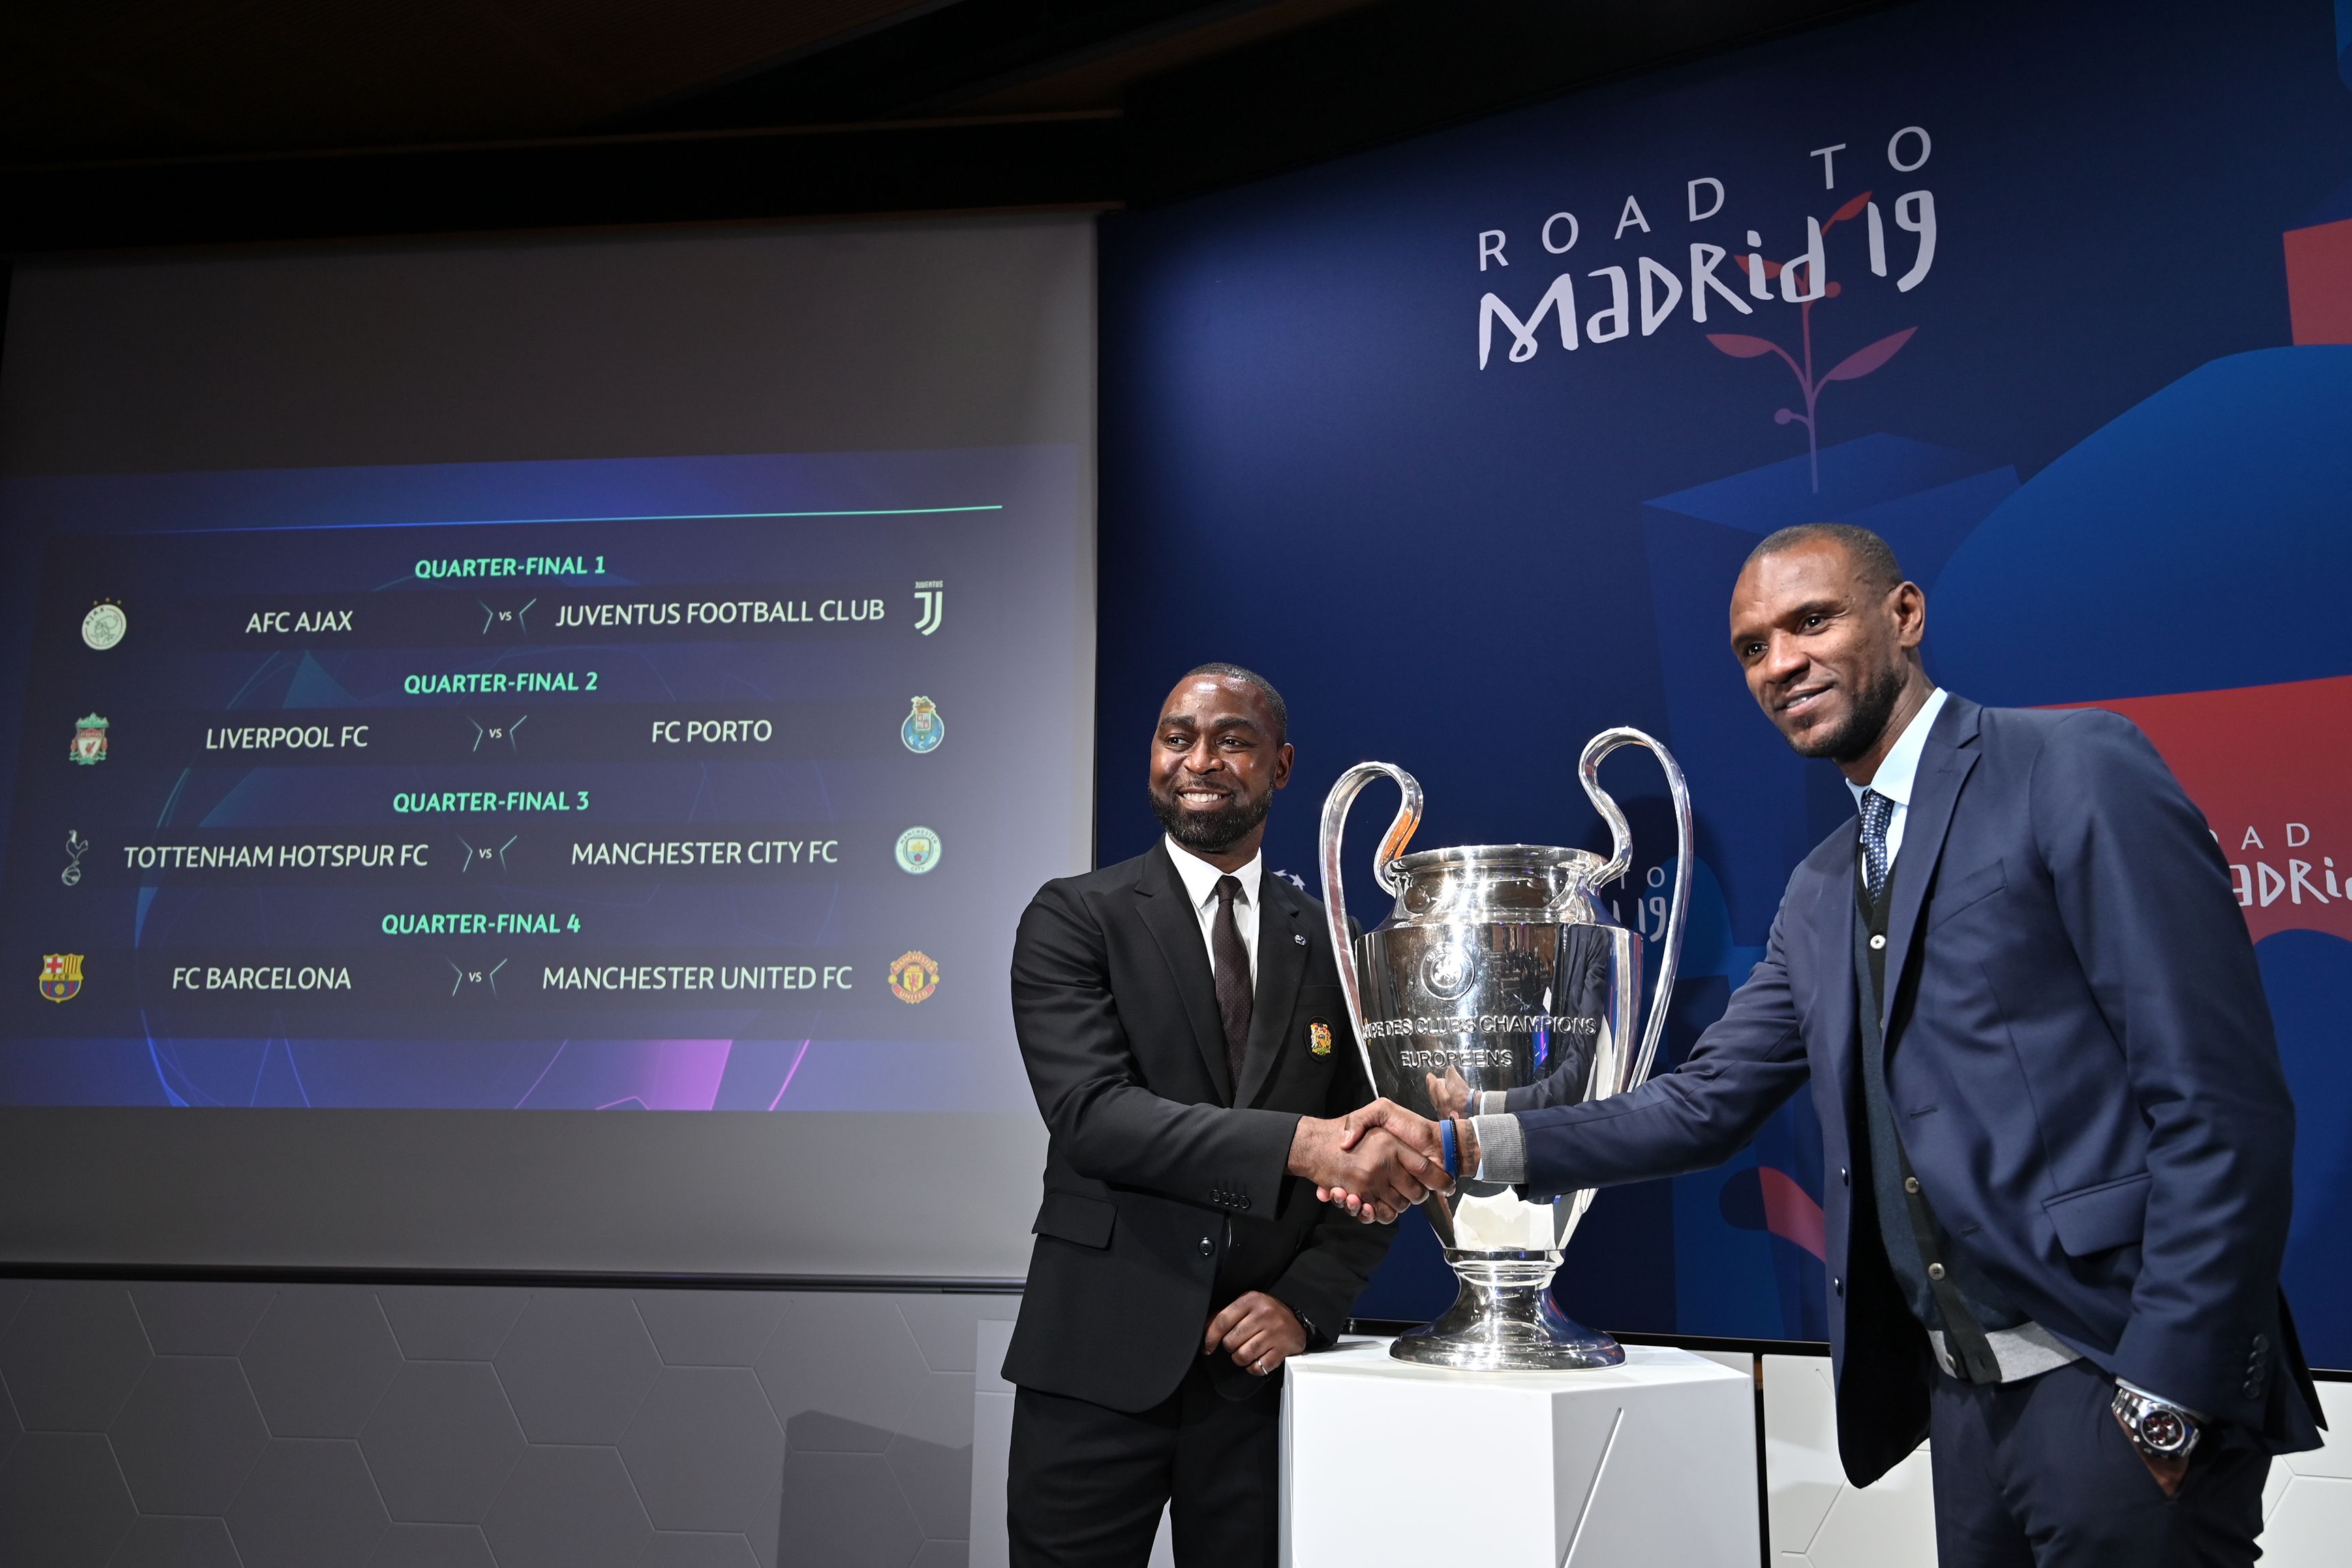 Manchester United football club ambassador Andy Cole (RL shakes hands with FC Barcelona ambassador Eric Abidal next to results of the draw for the Champions league quarter-final and the competition's trophy, on March 15, 2019 in Nyon. (Photo by Fabrice COFFRINI / AFP)        (Photo credit should read FABRICE COFFRINI/AFP/Getty Images)